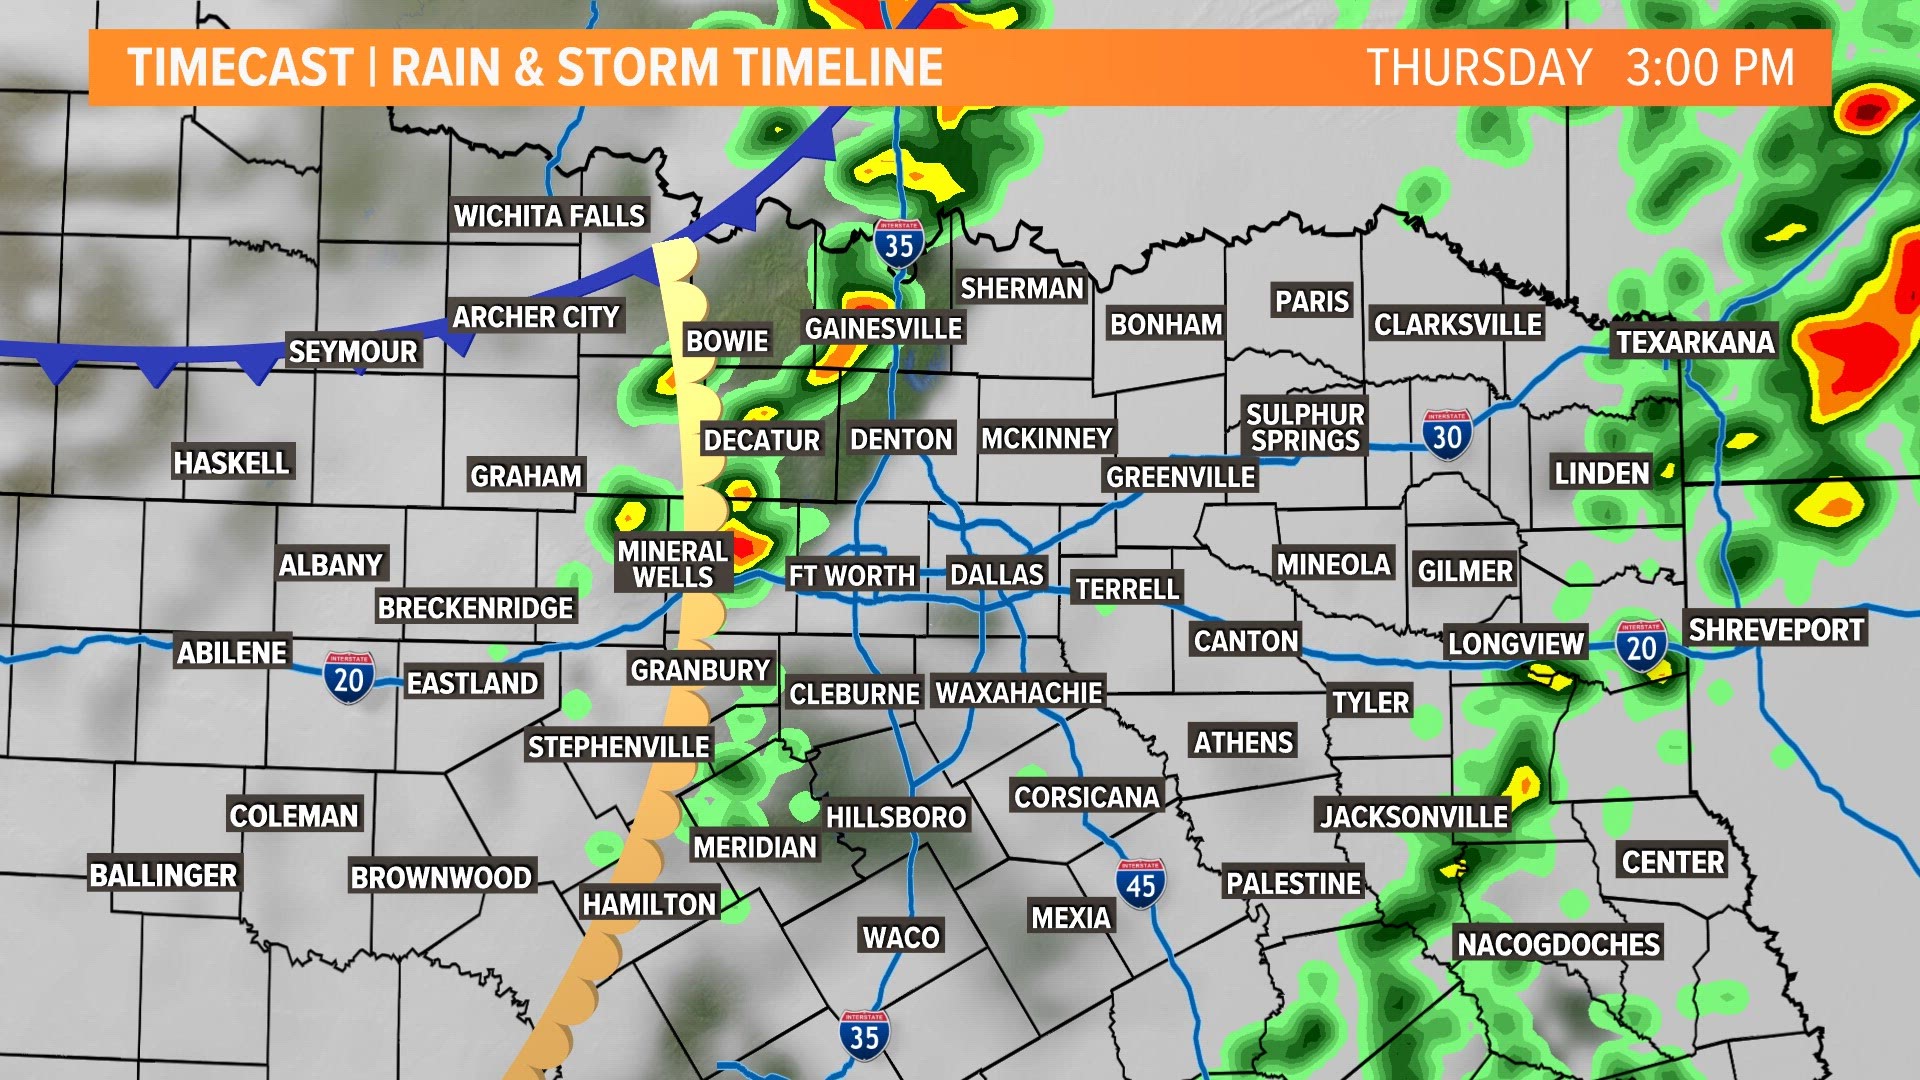 DFW WEATHER: Strong thunderstorm timeline